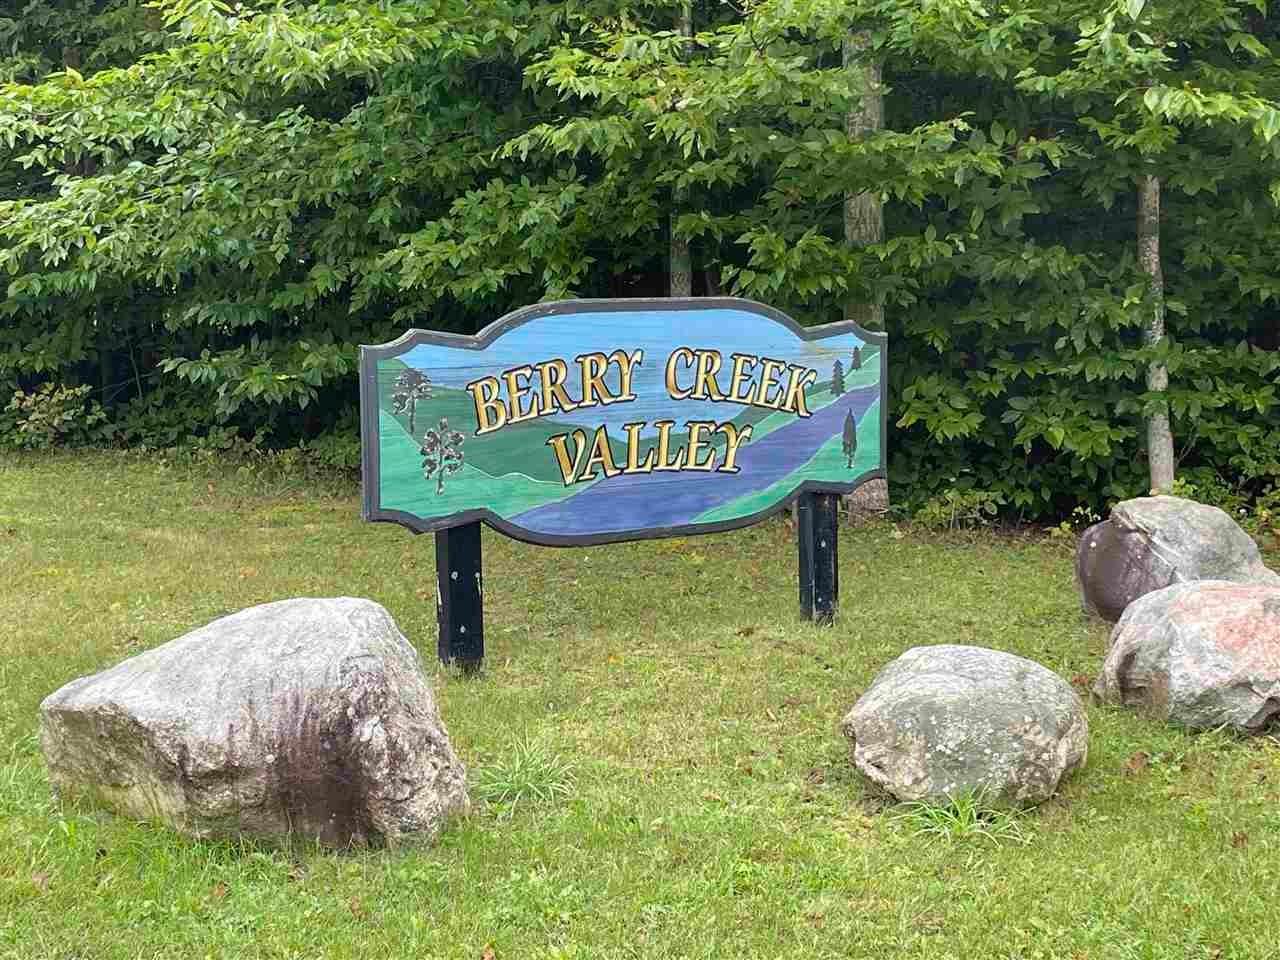 Land for Sale at TBD Berry Creek Valley Road Petoskey, Michigan 49770 United States